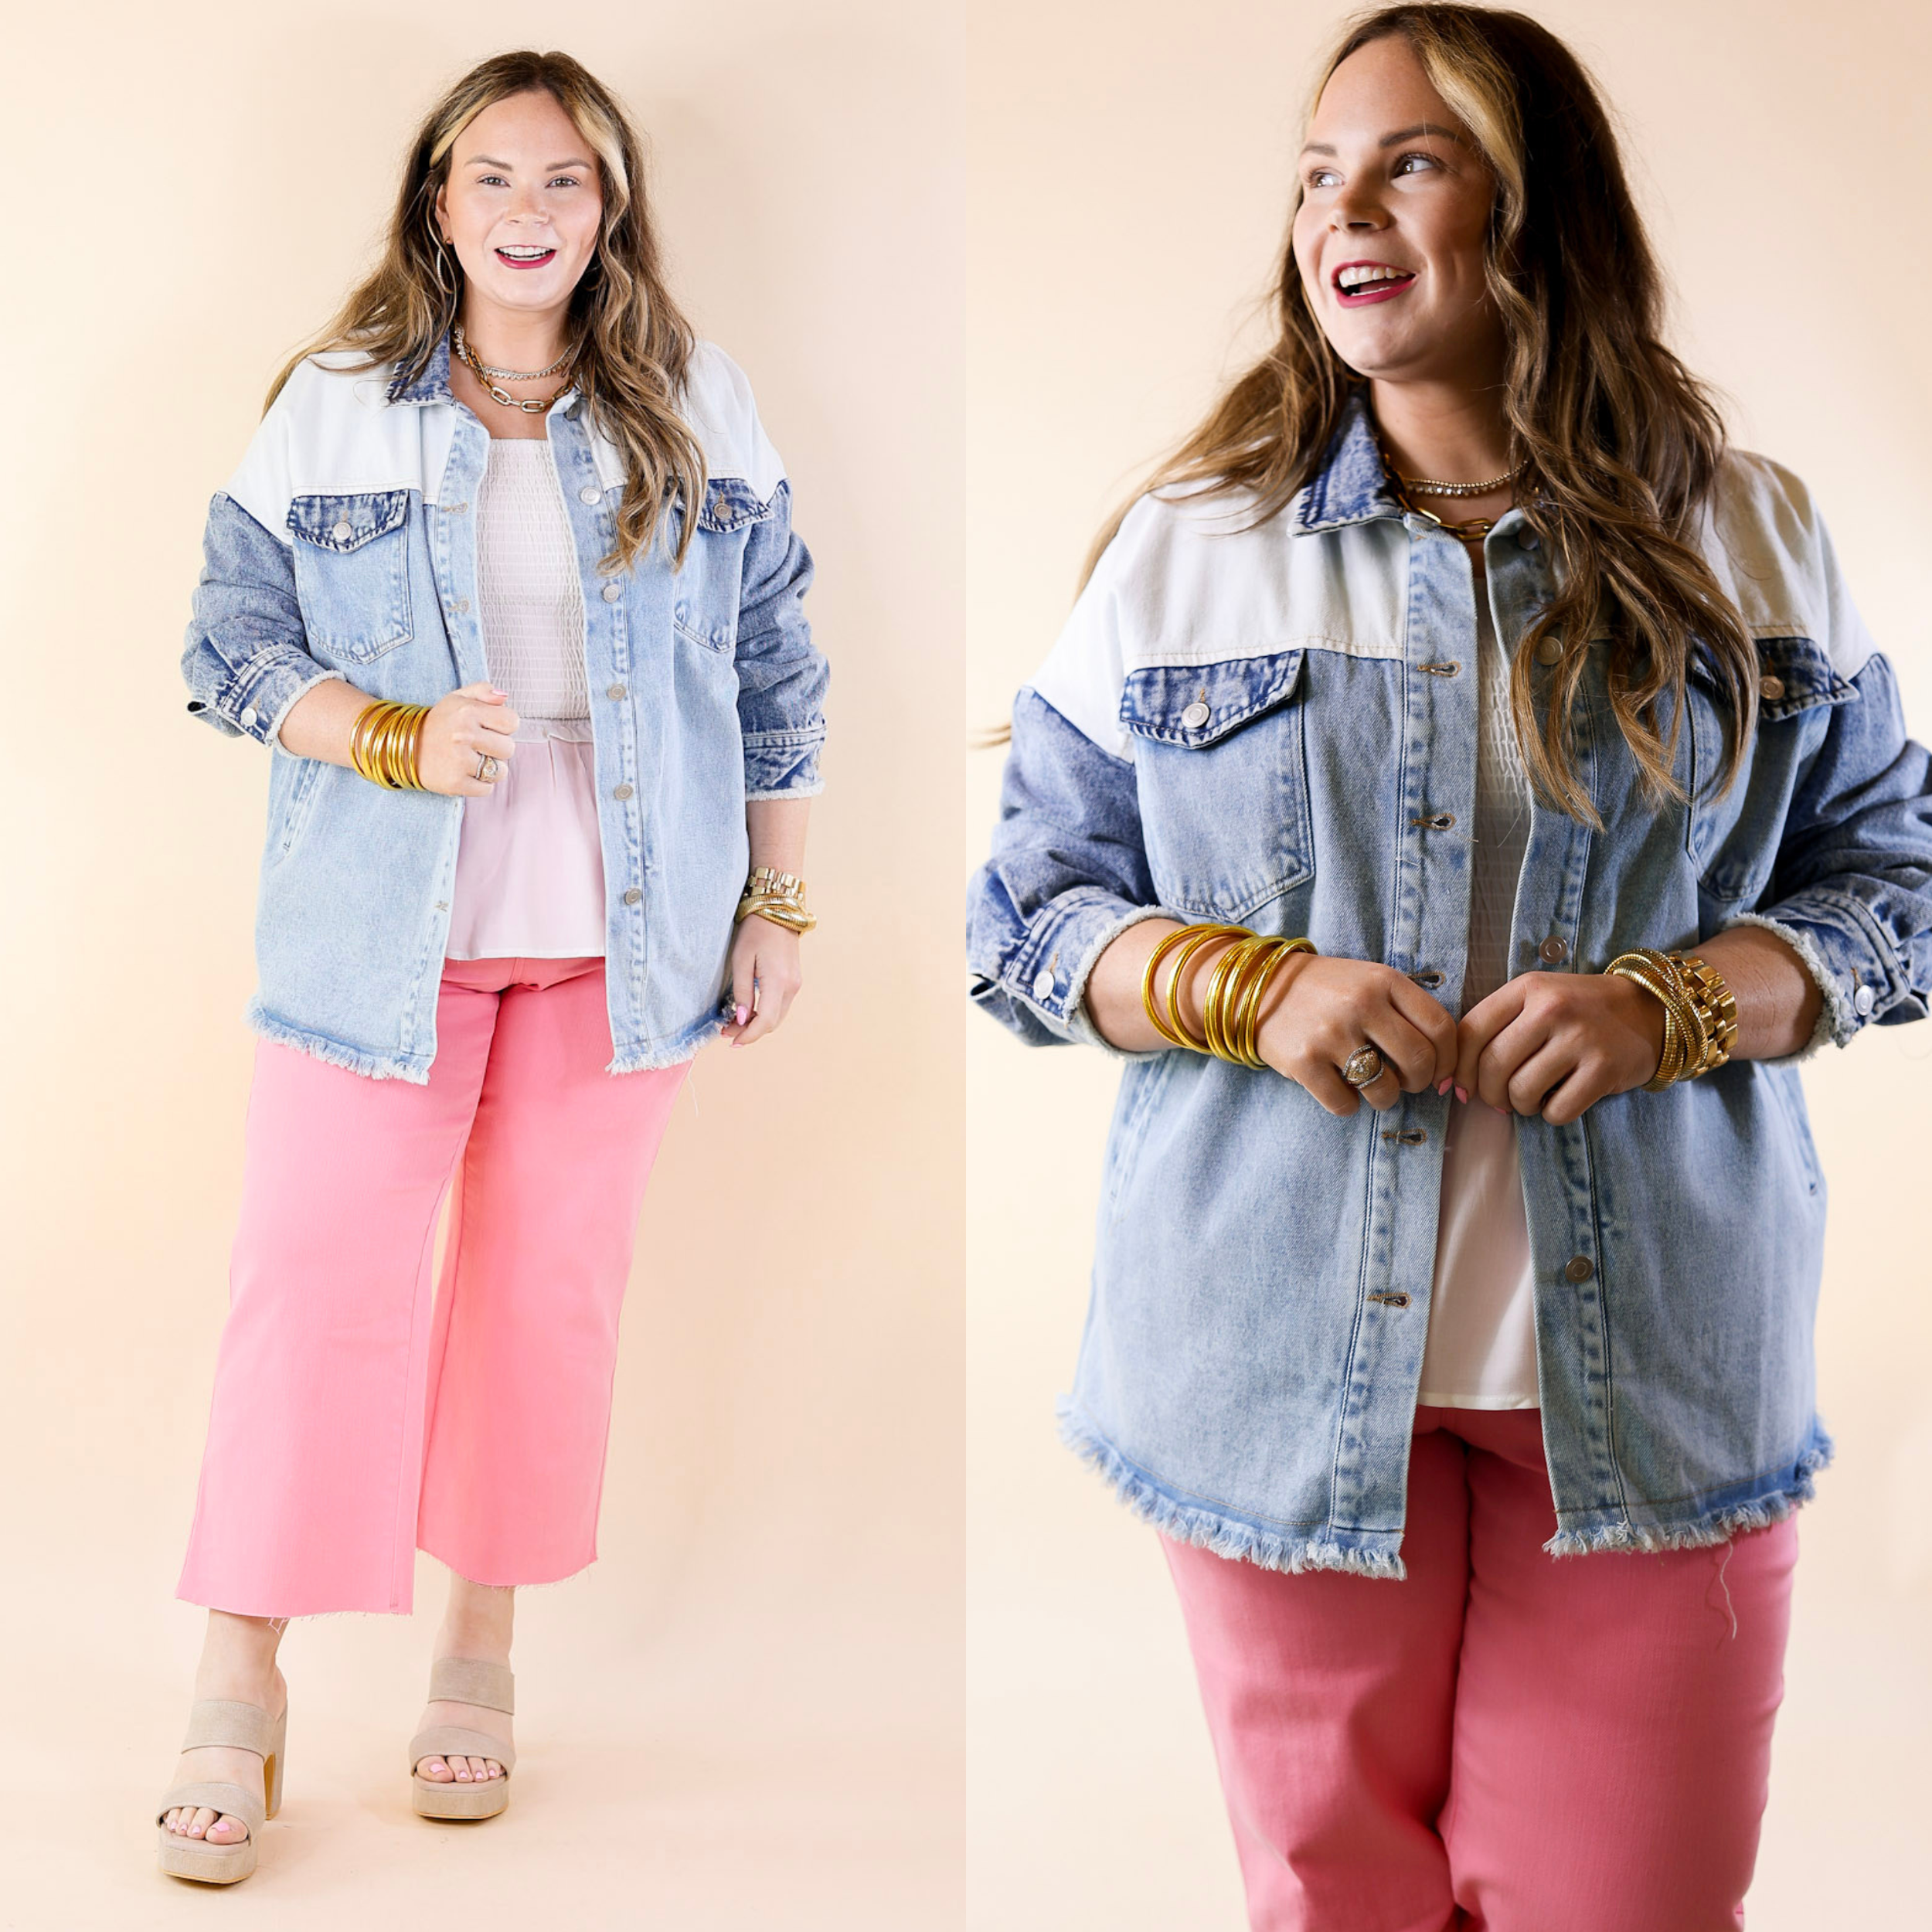 Style Mentor Color Block Button Up Jacket in Denim - Giddy Up Glamour Boutique